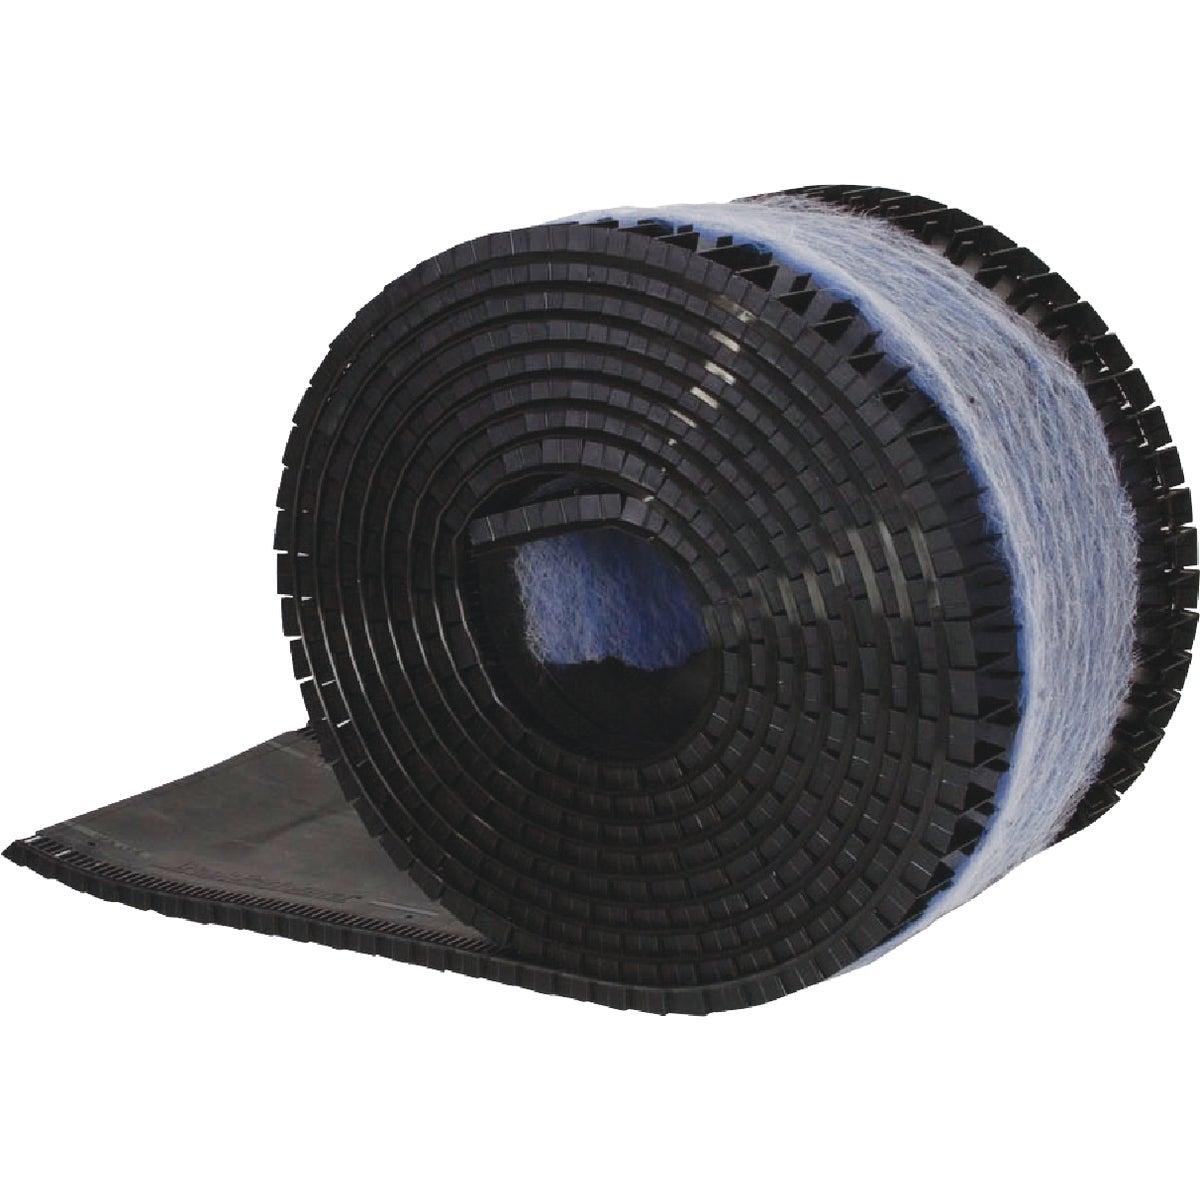 Item 111546, The filtered 12" x 28' rolled ridge vent is nail gun friendly with 2 coils 